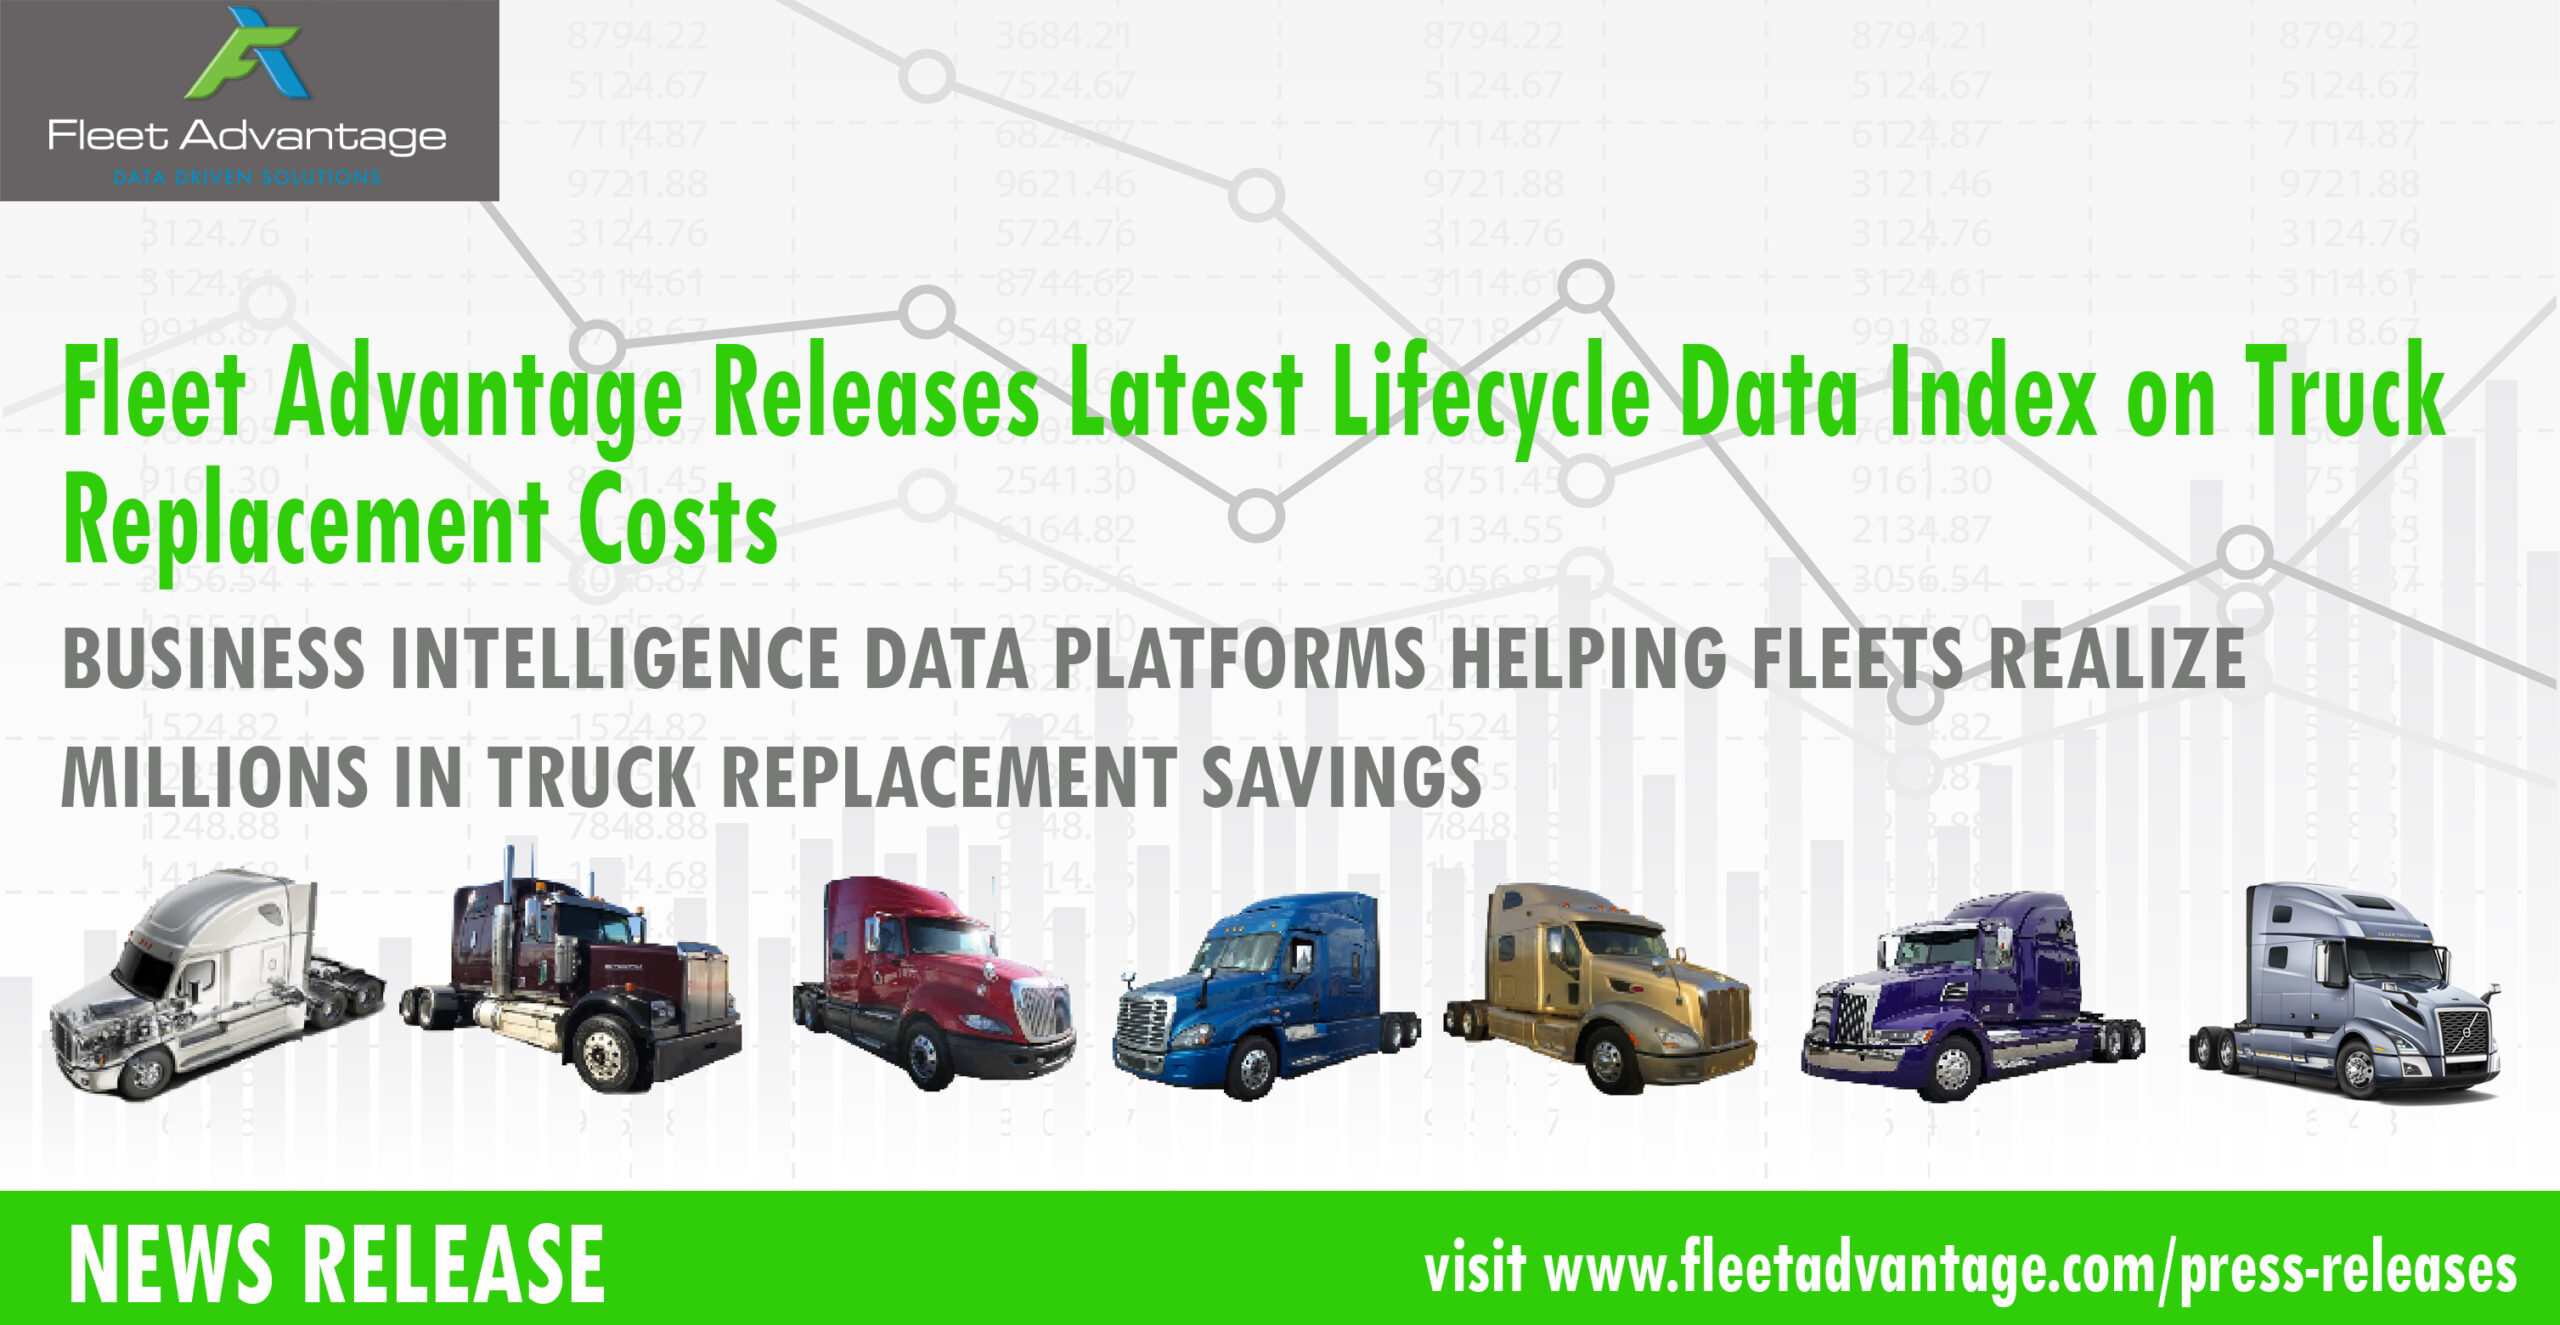 FLEET ADVANTAGE RELEASES NEW TRUCK LIFECYCLE DATA INDEX COMPARING 2020 MODEL YEAR TRUCKS